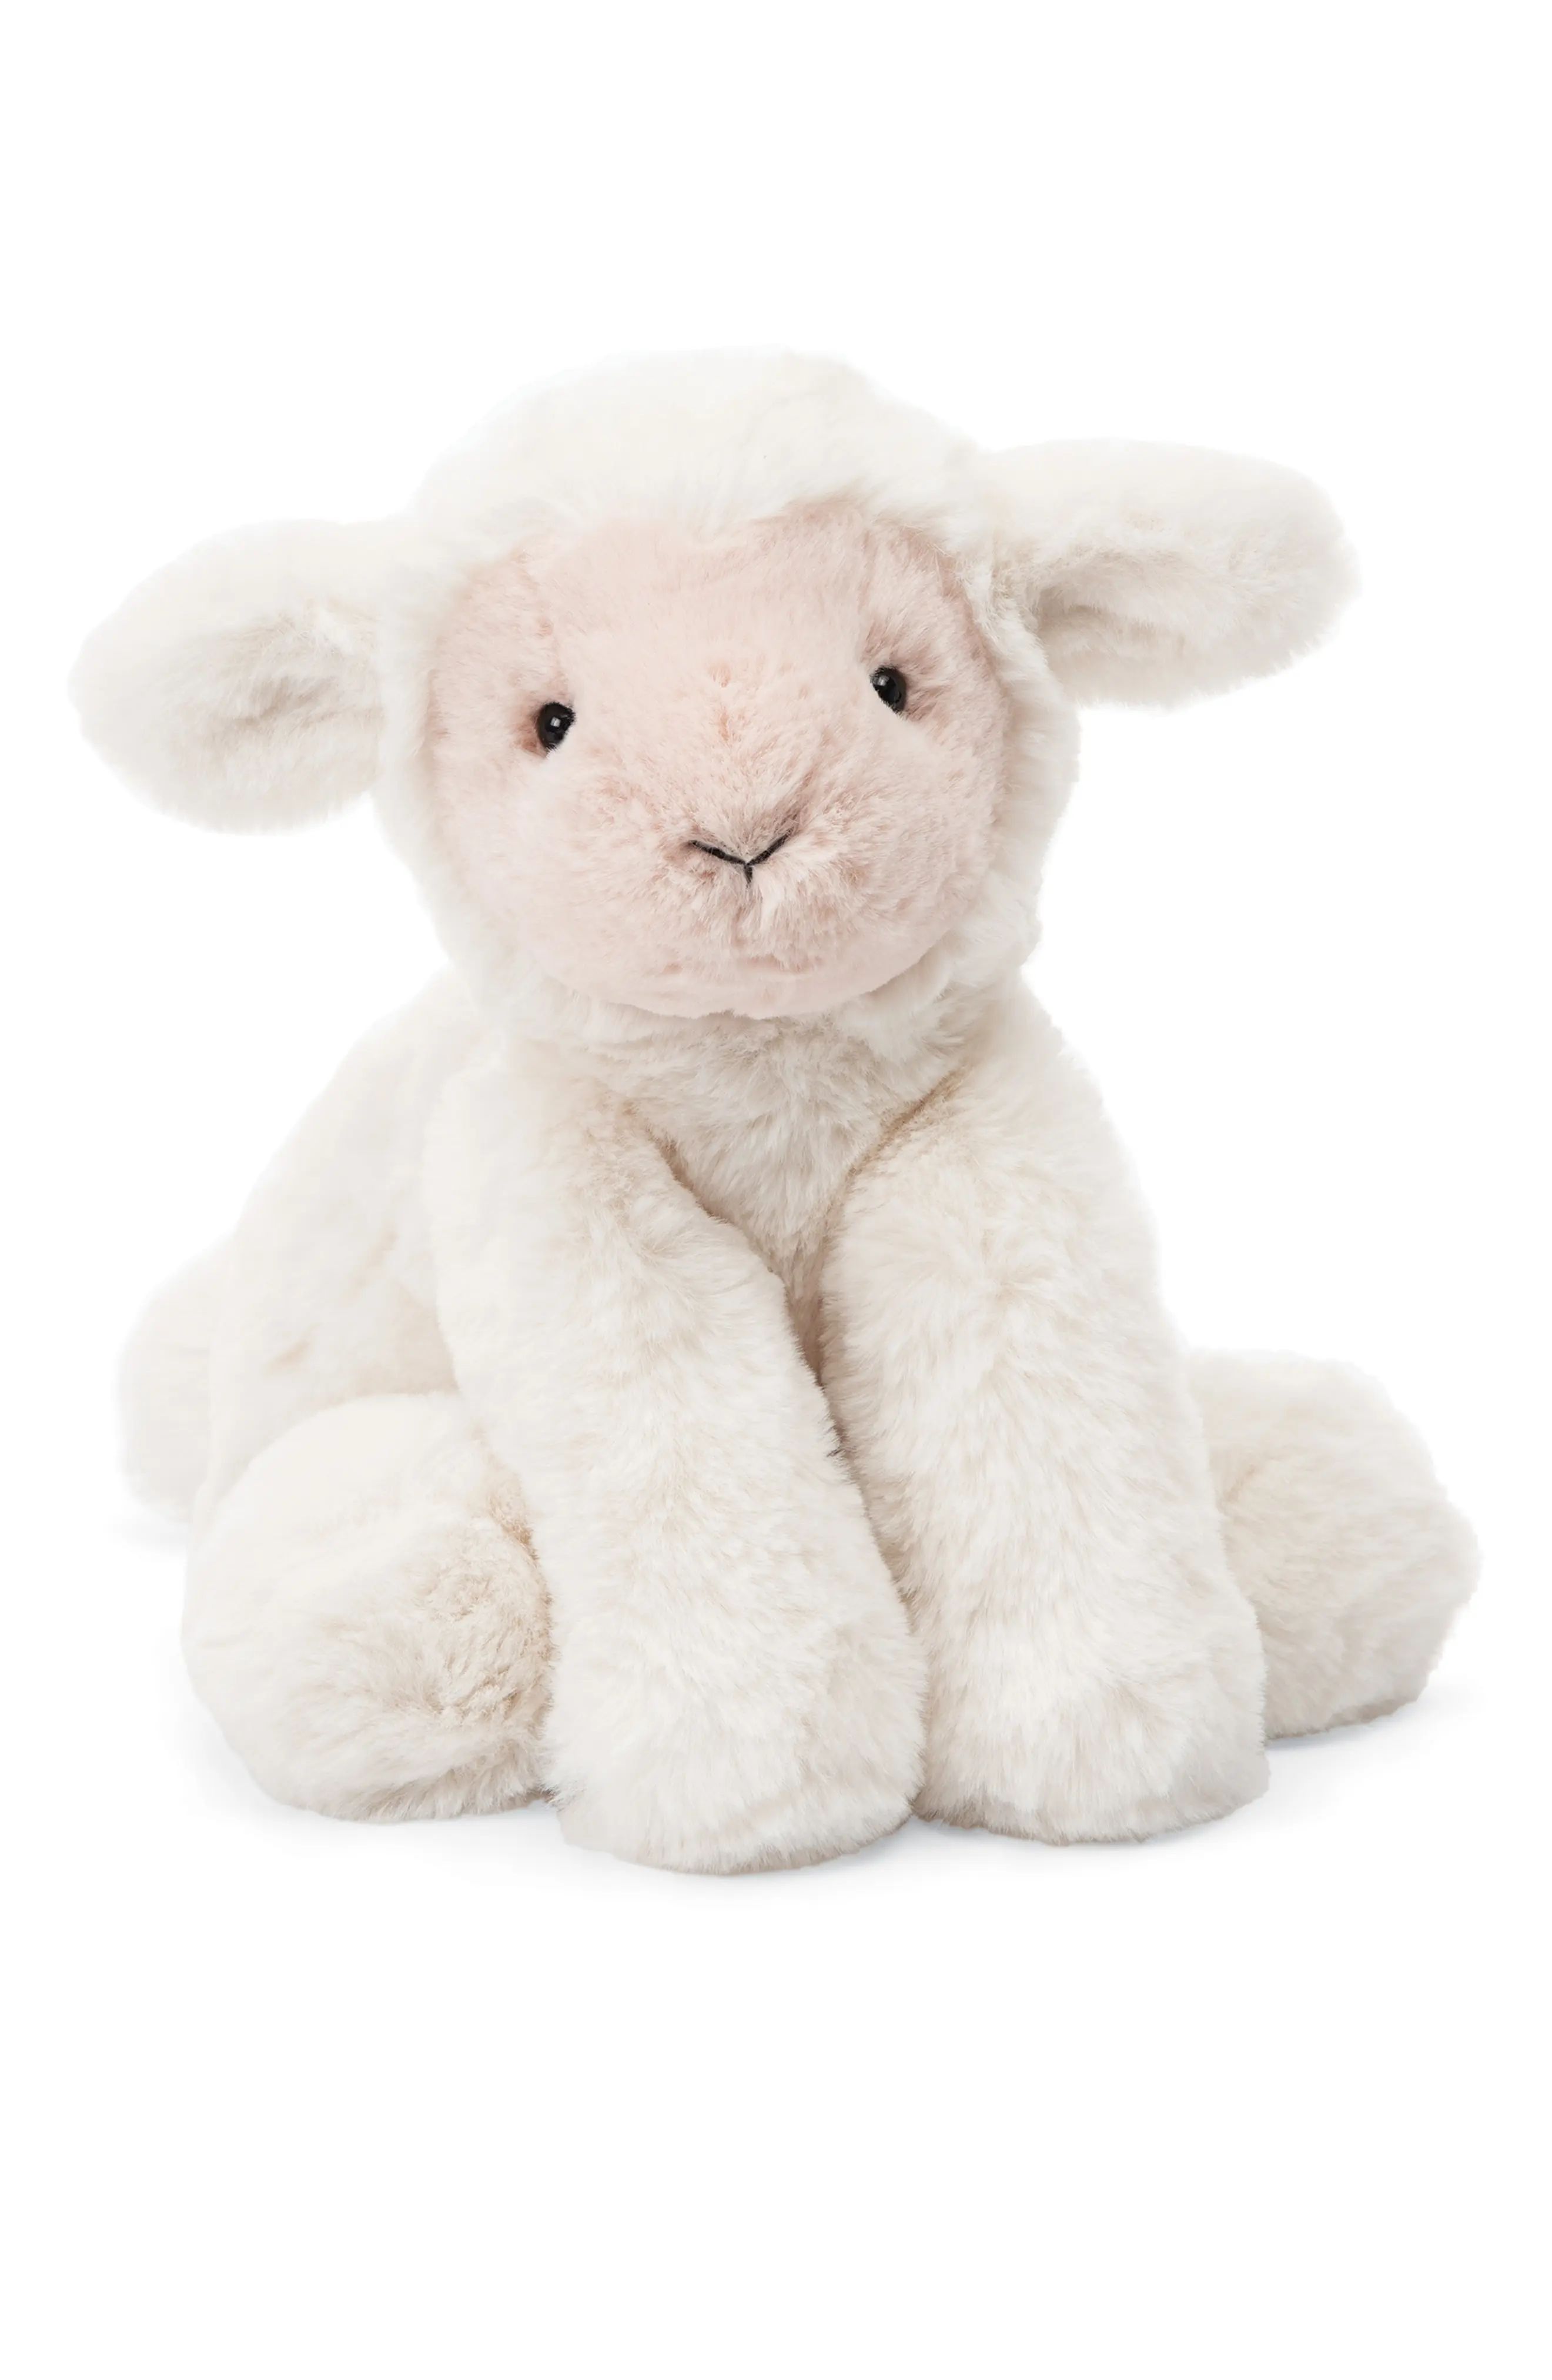 Jellycat Smudge Lamb Stuffed Animal in White at Nordstrom | Nordstrom